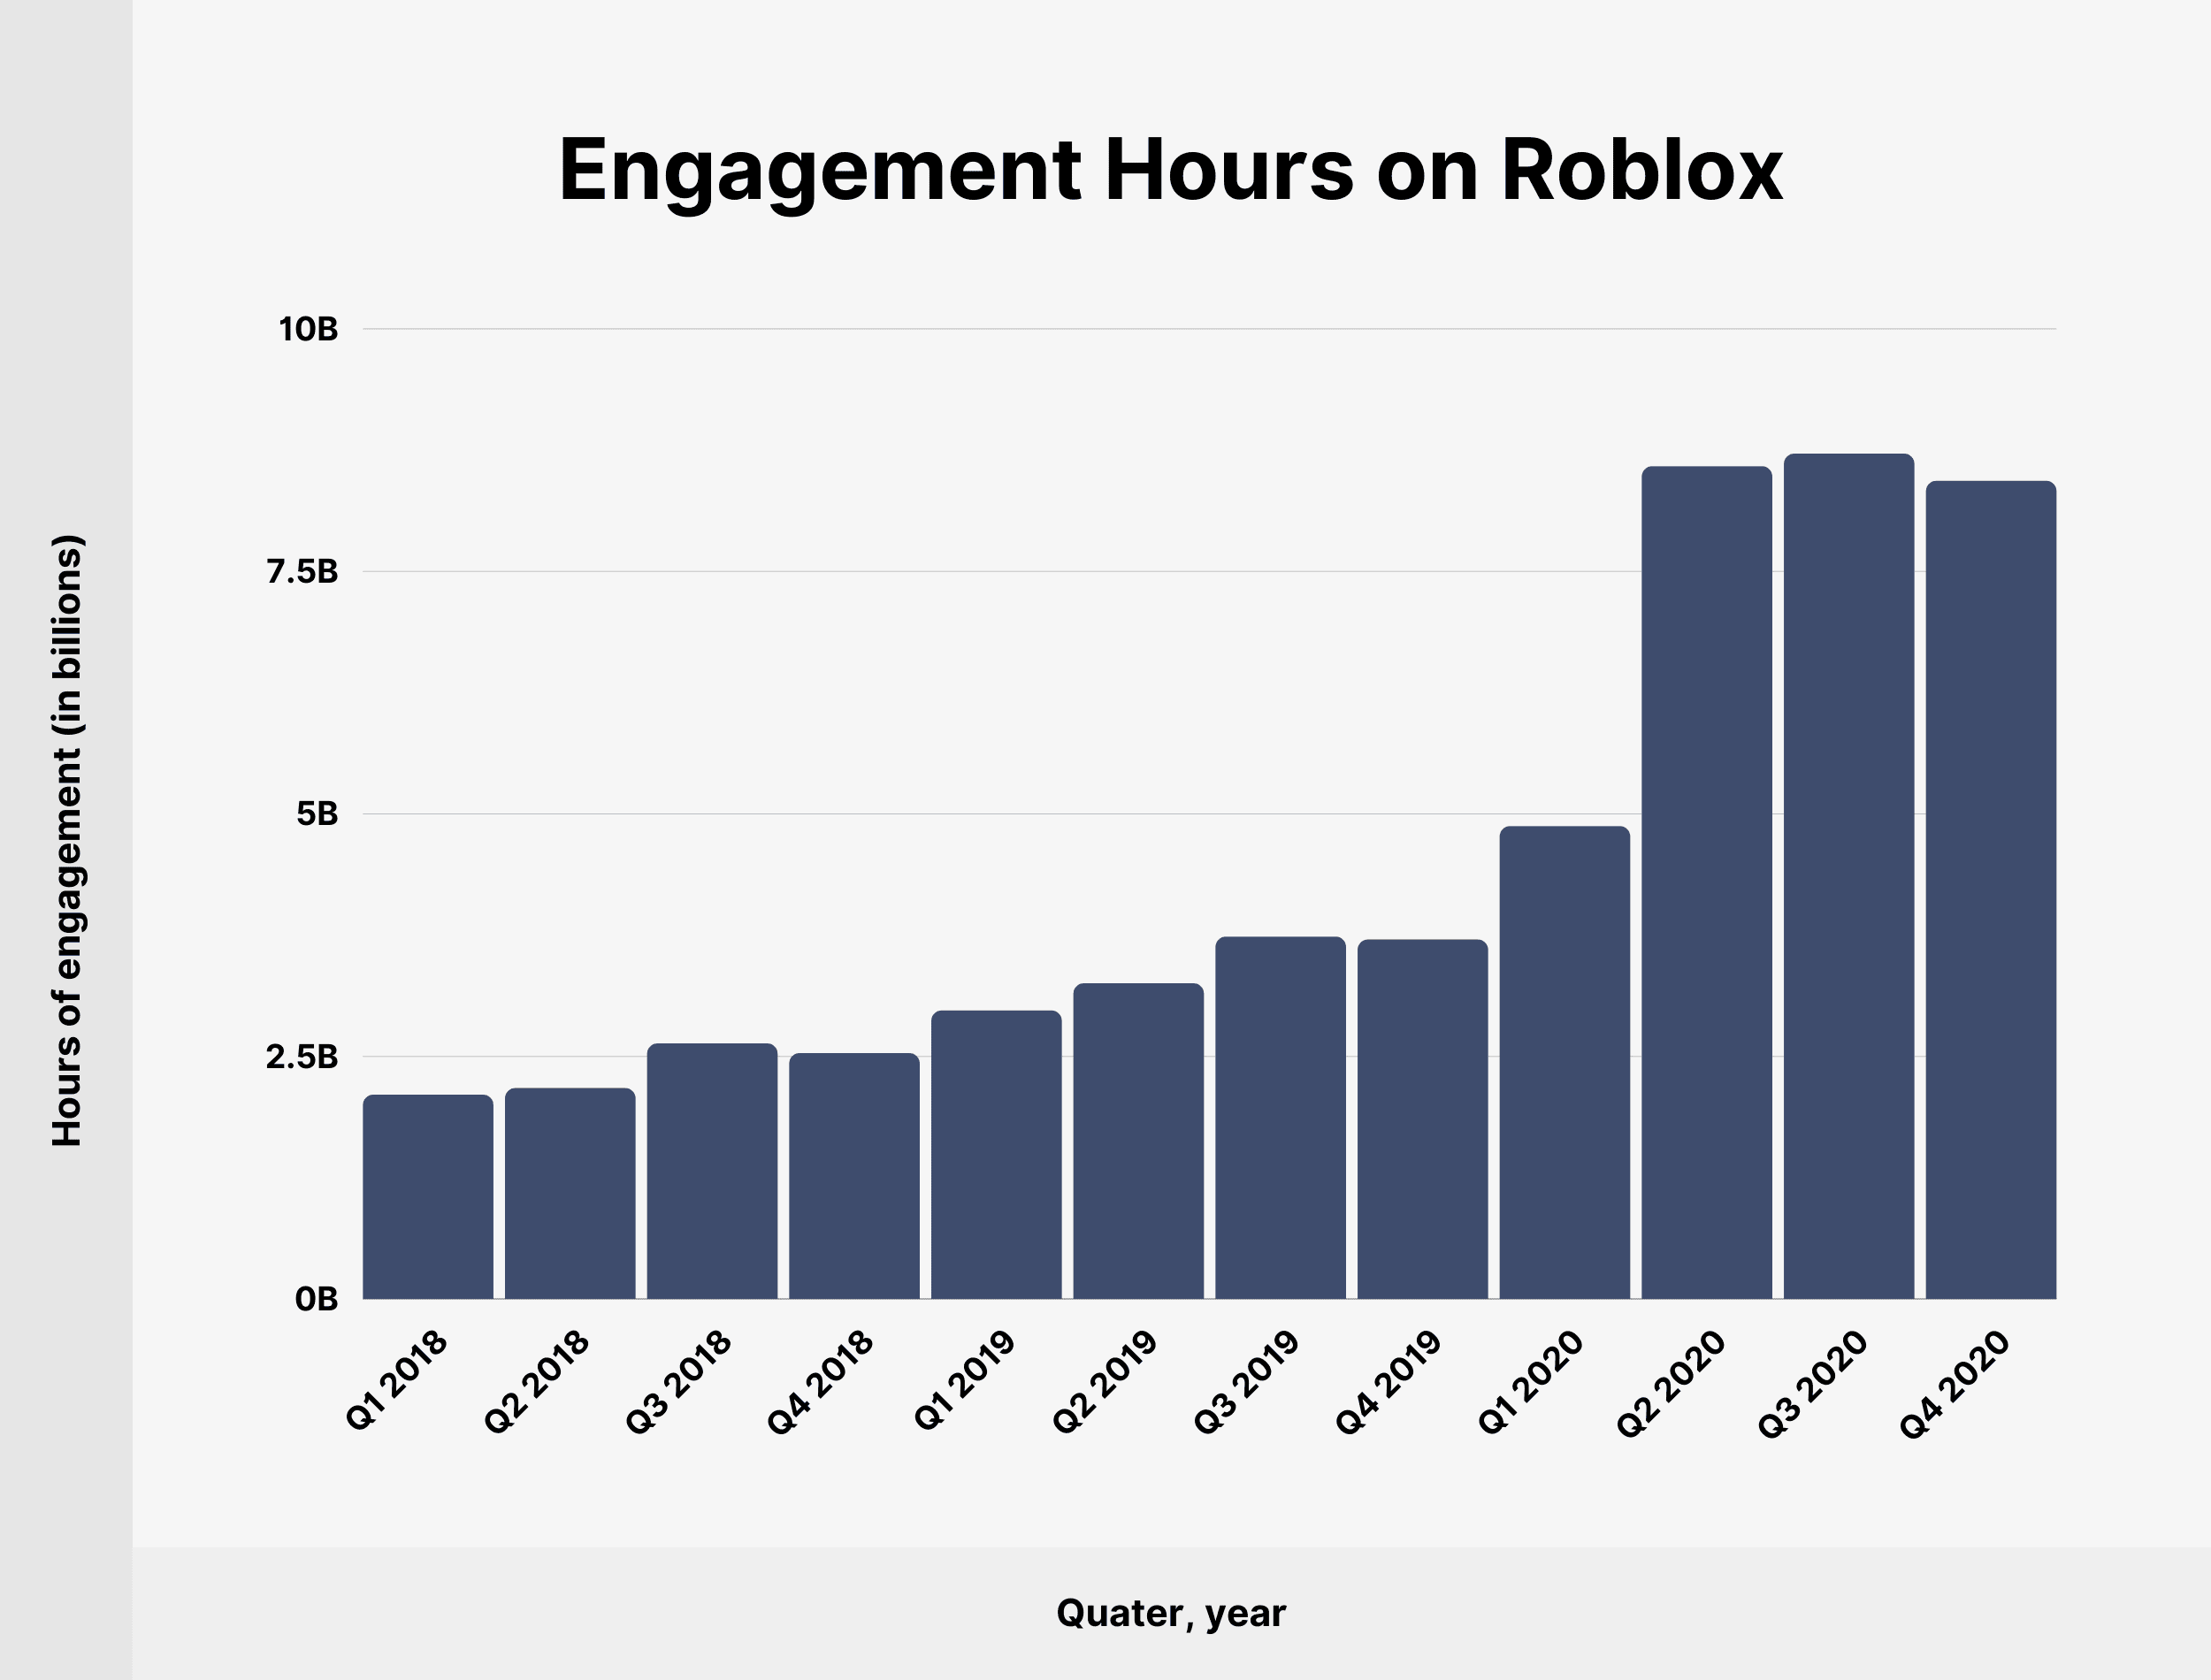 Engagement hours on Roblox